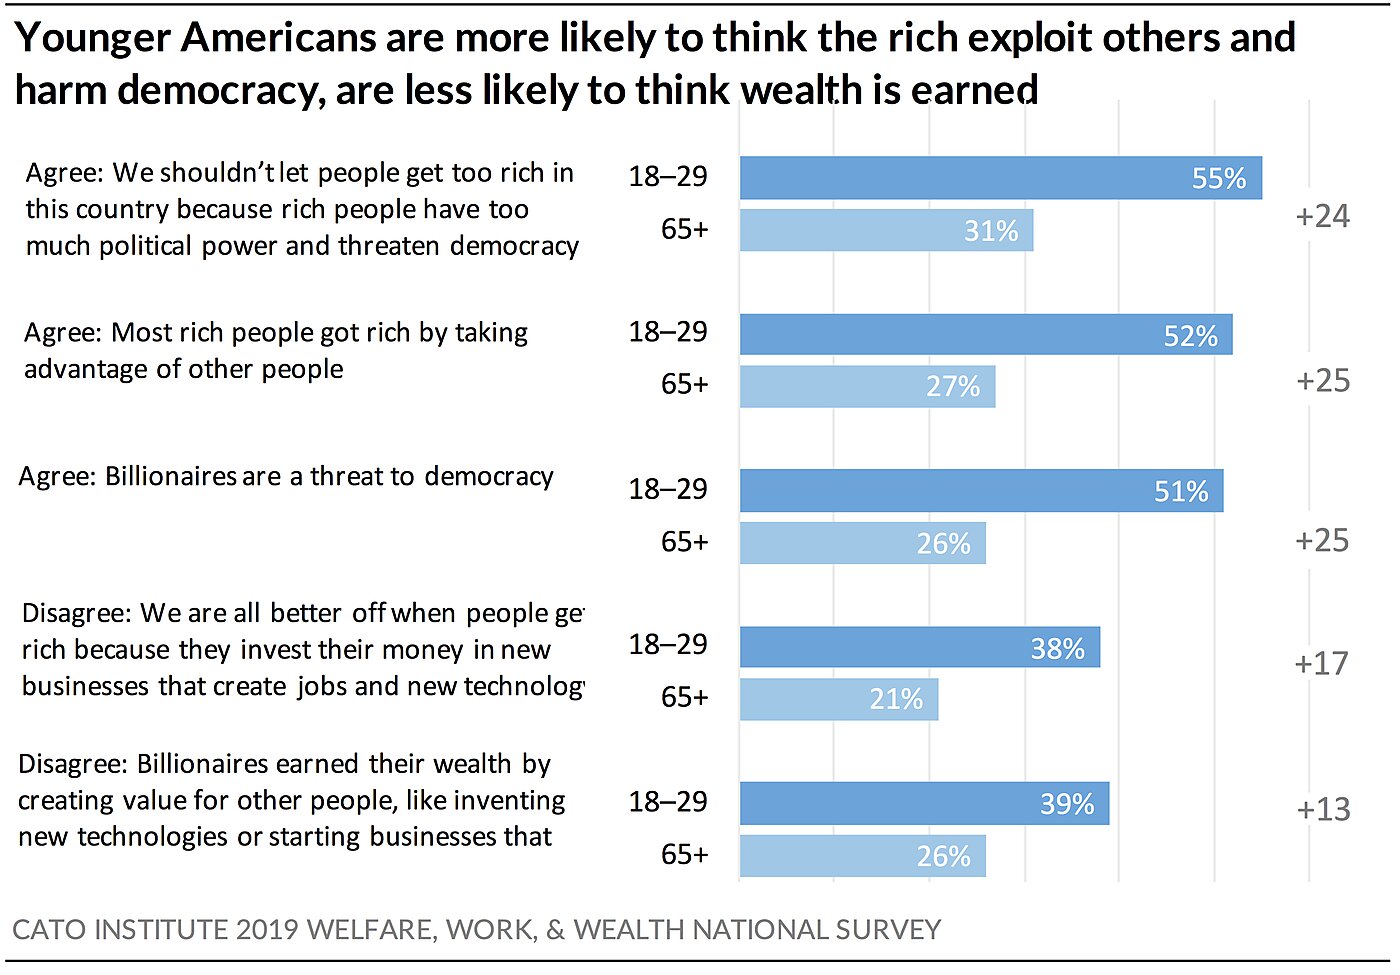 Younger Americans are more likely to think the rich exploit others